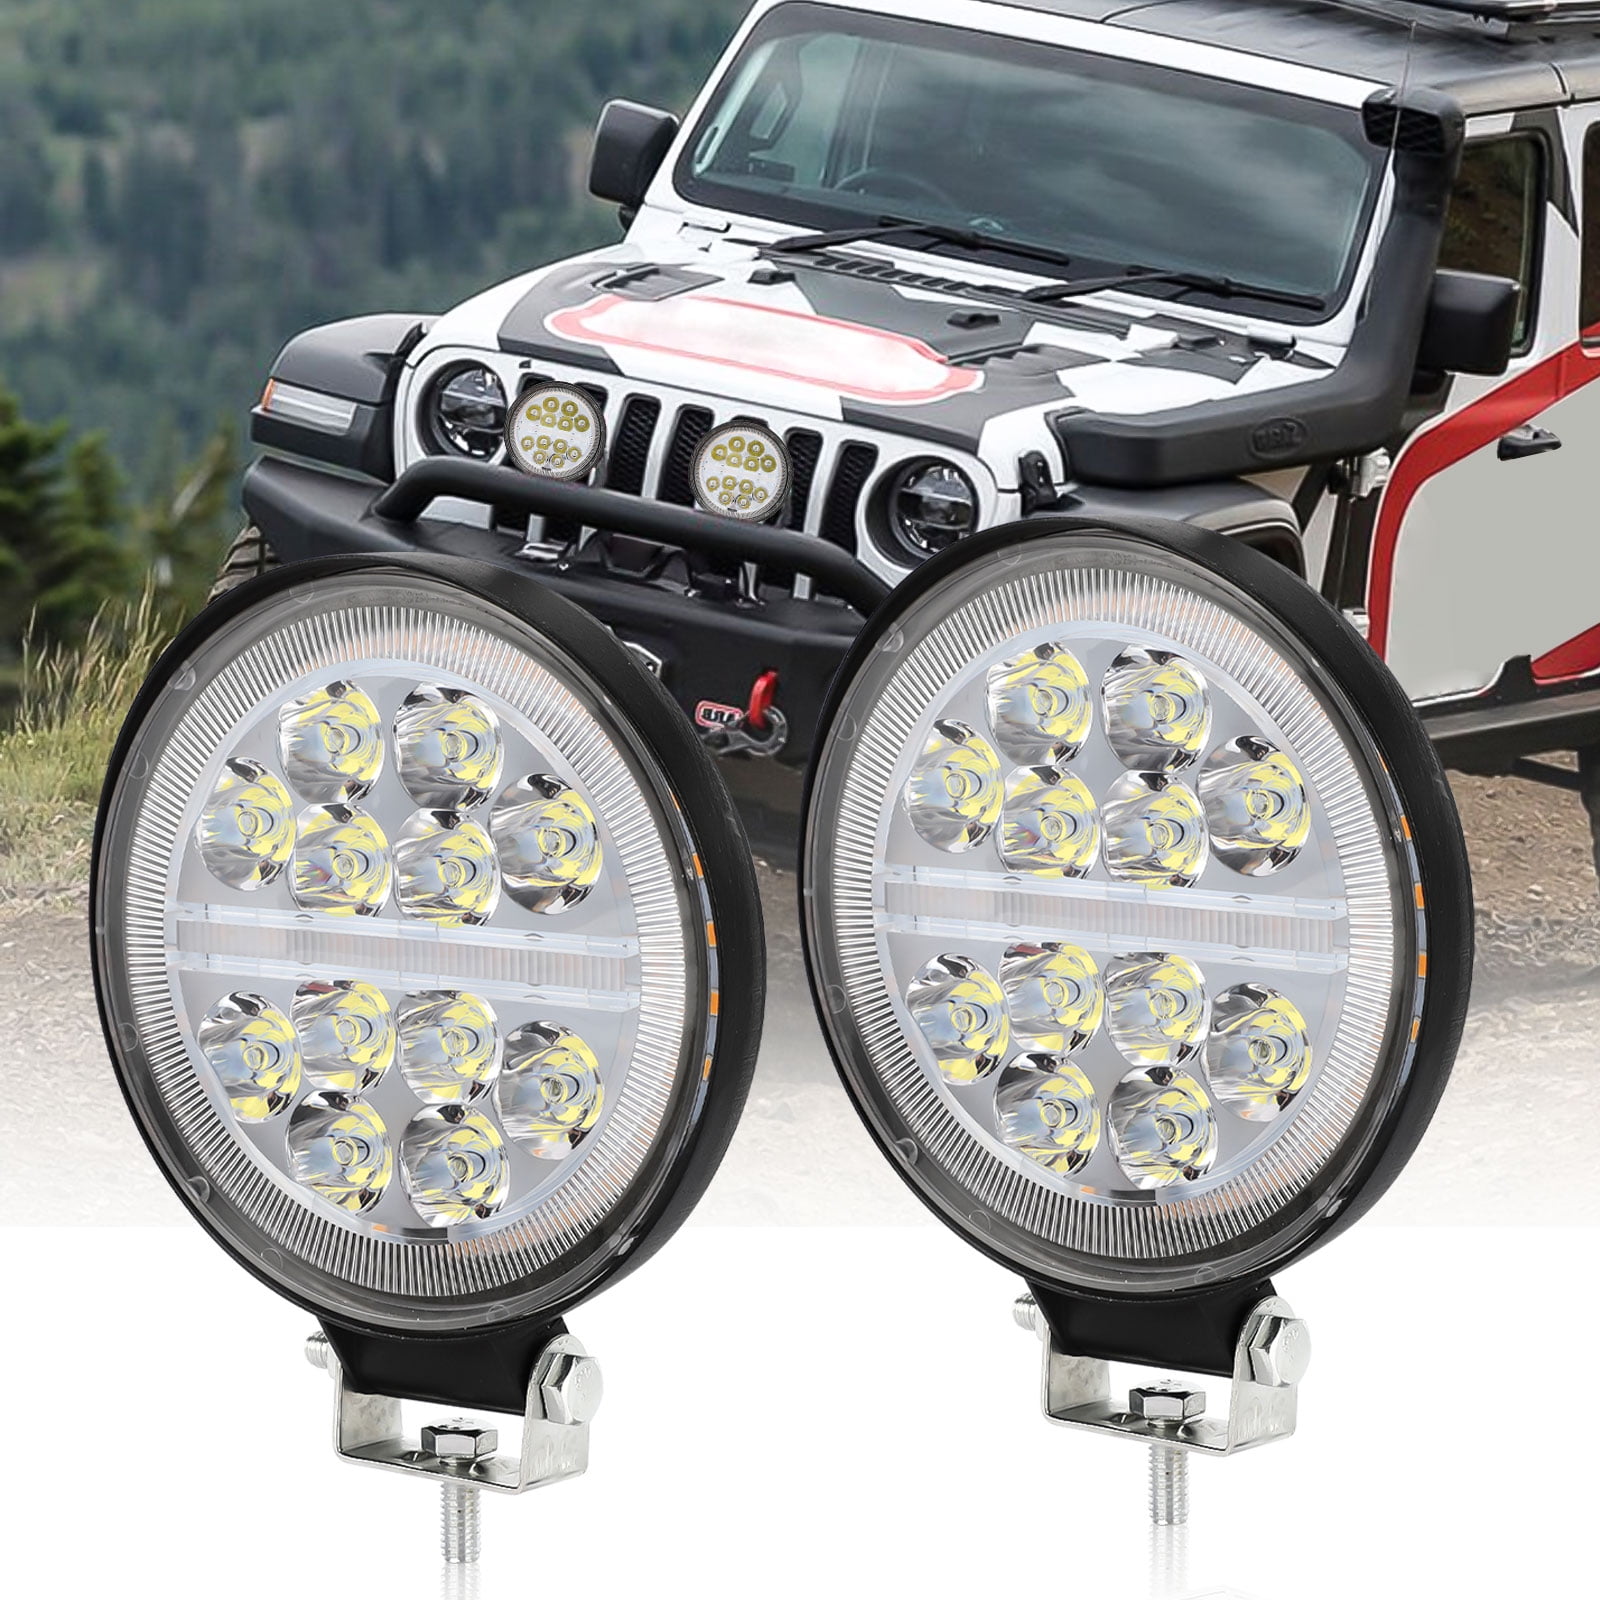 Off Road Jeep & Vehicle LED Light Bars - LAMPHUS ® Cruizer ™ Product Review  & Night Drive Demo 